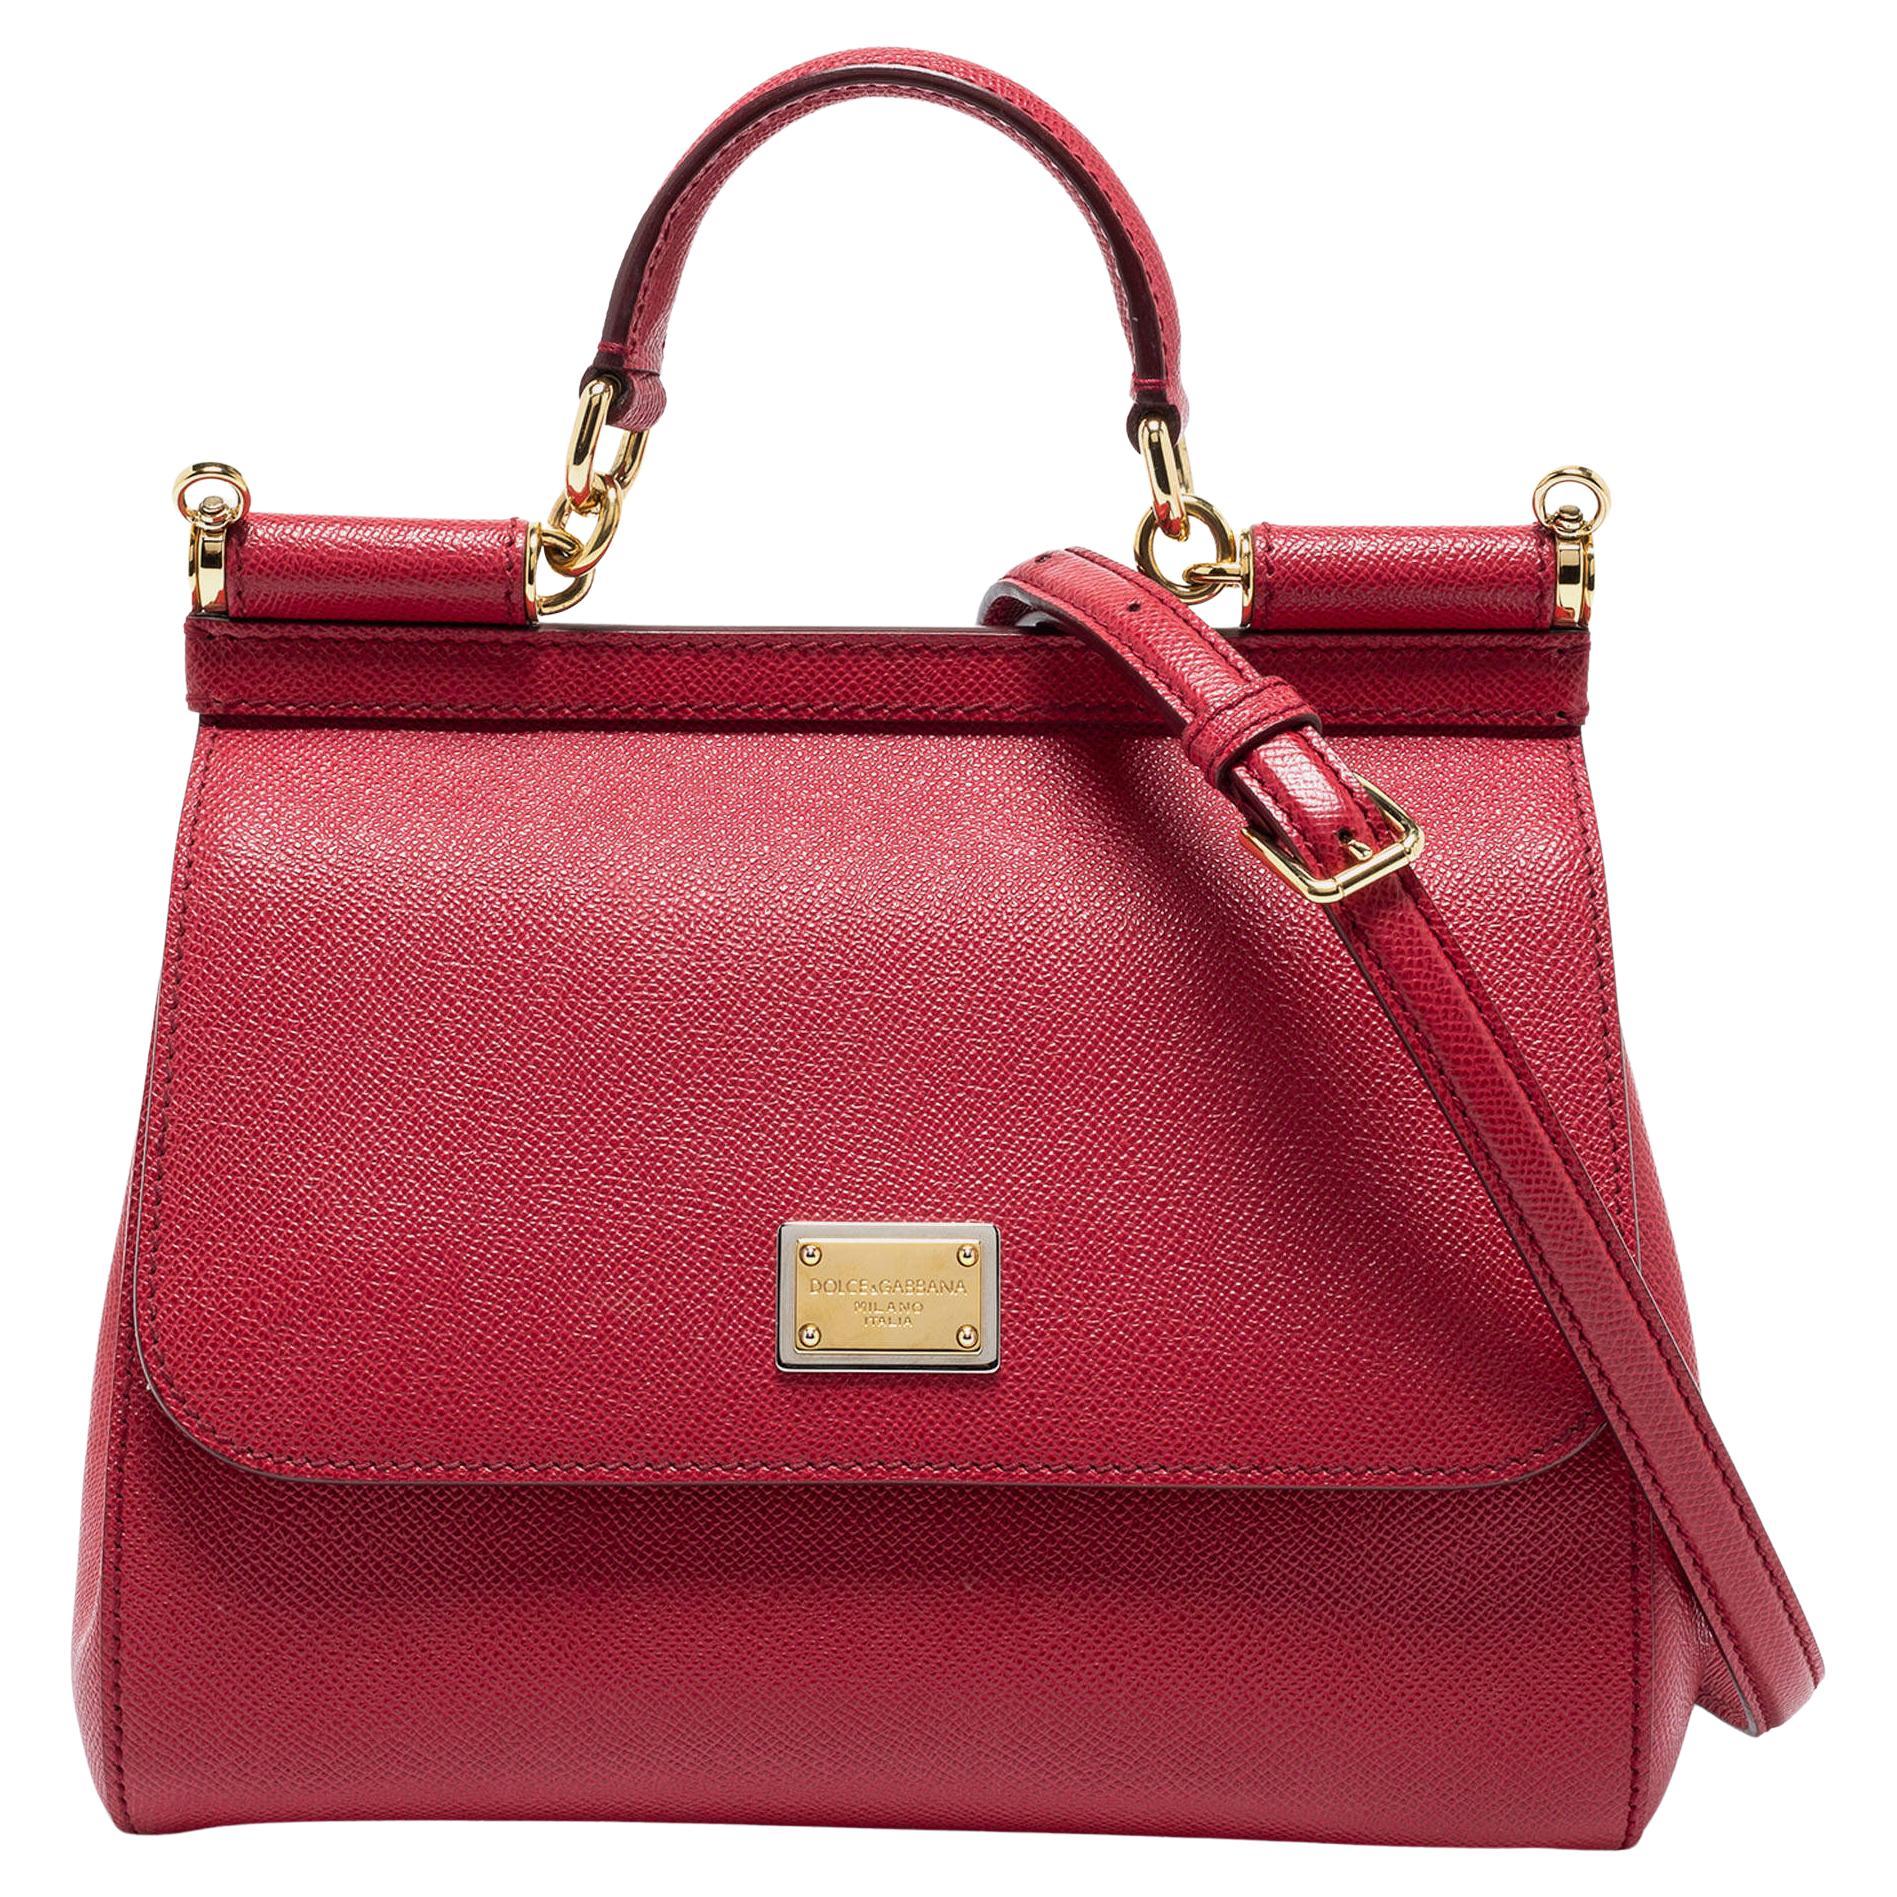 Dolce & Gabbana Red Leather Medium Miss Sicily Tote